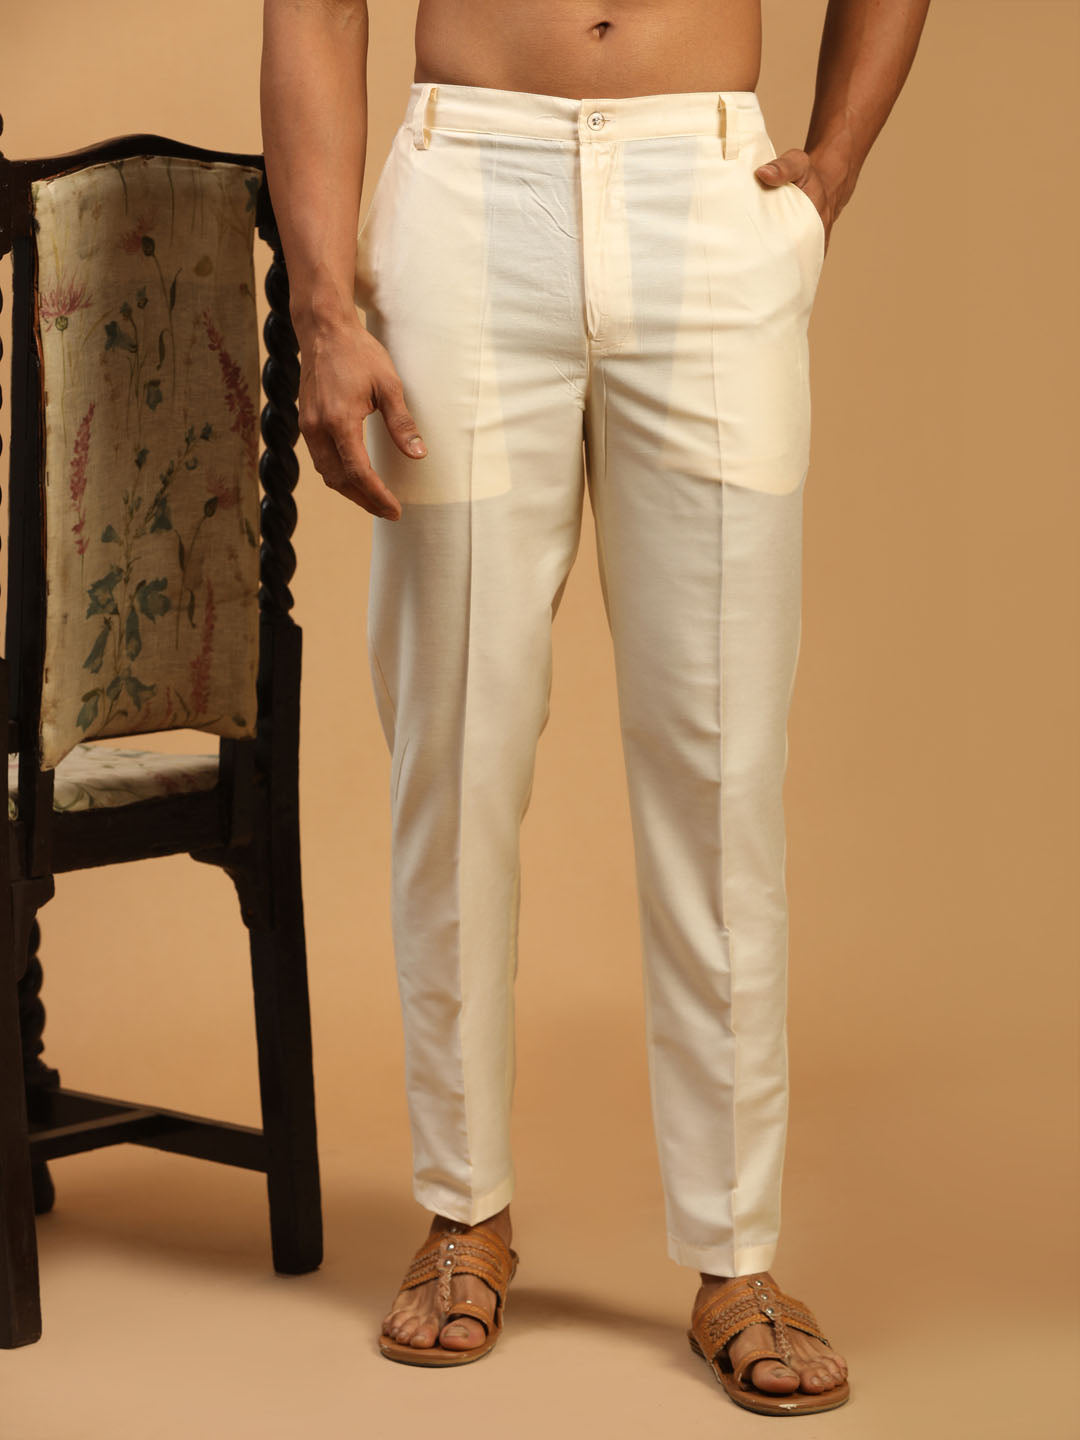 Buy Stylish Beige Cotton Blend Wrinkle Free Trousers For Men  Lowest price  in India GlowRoad